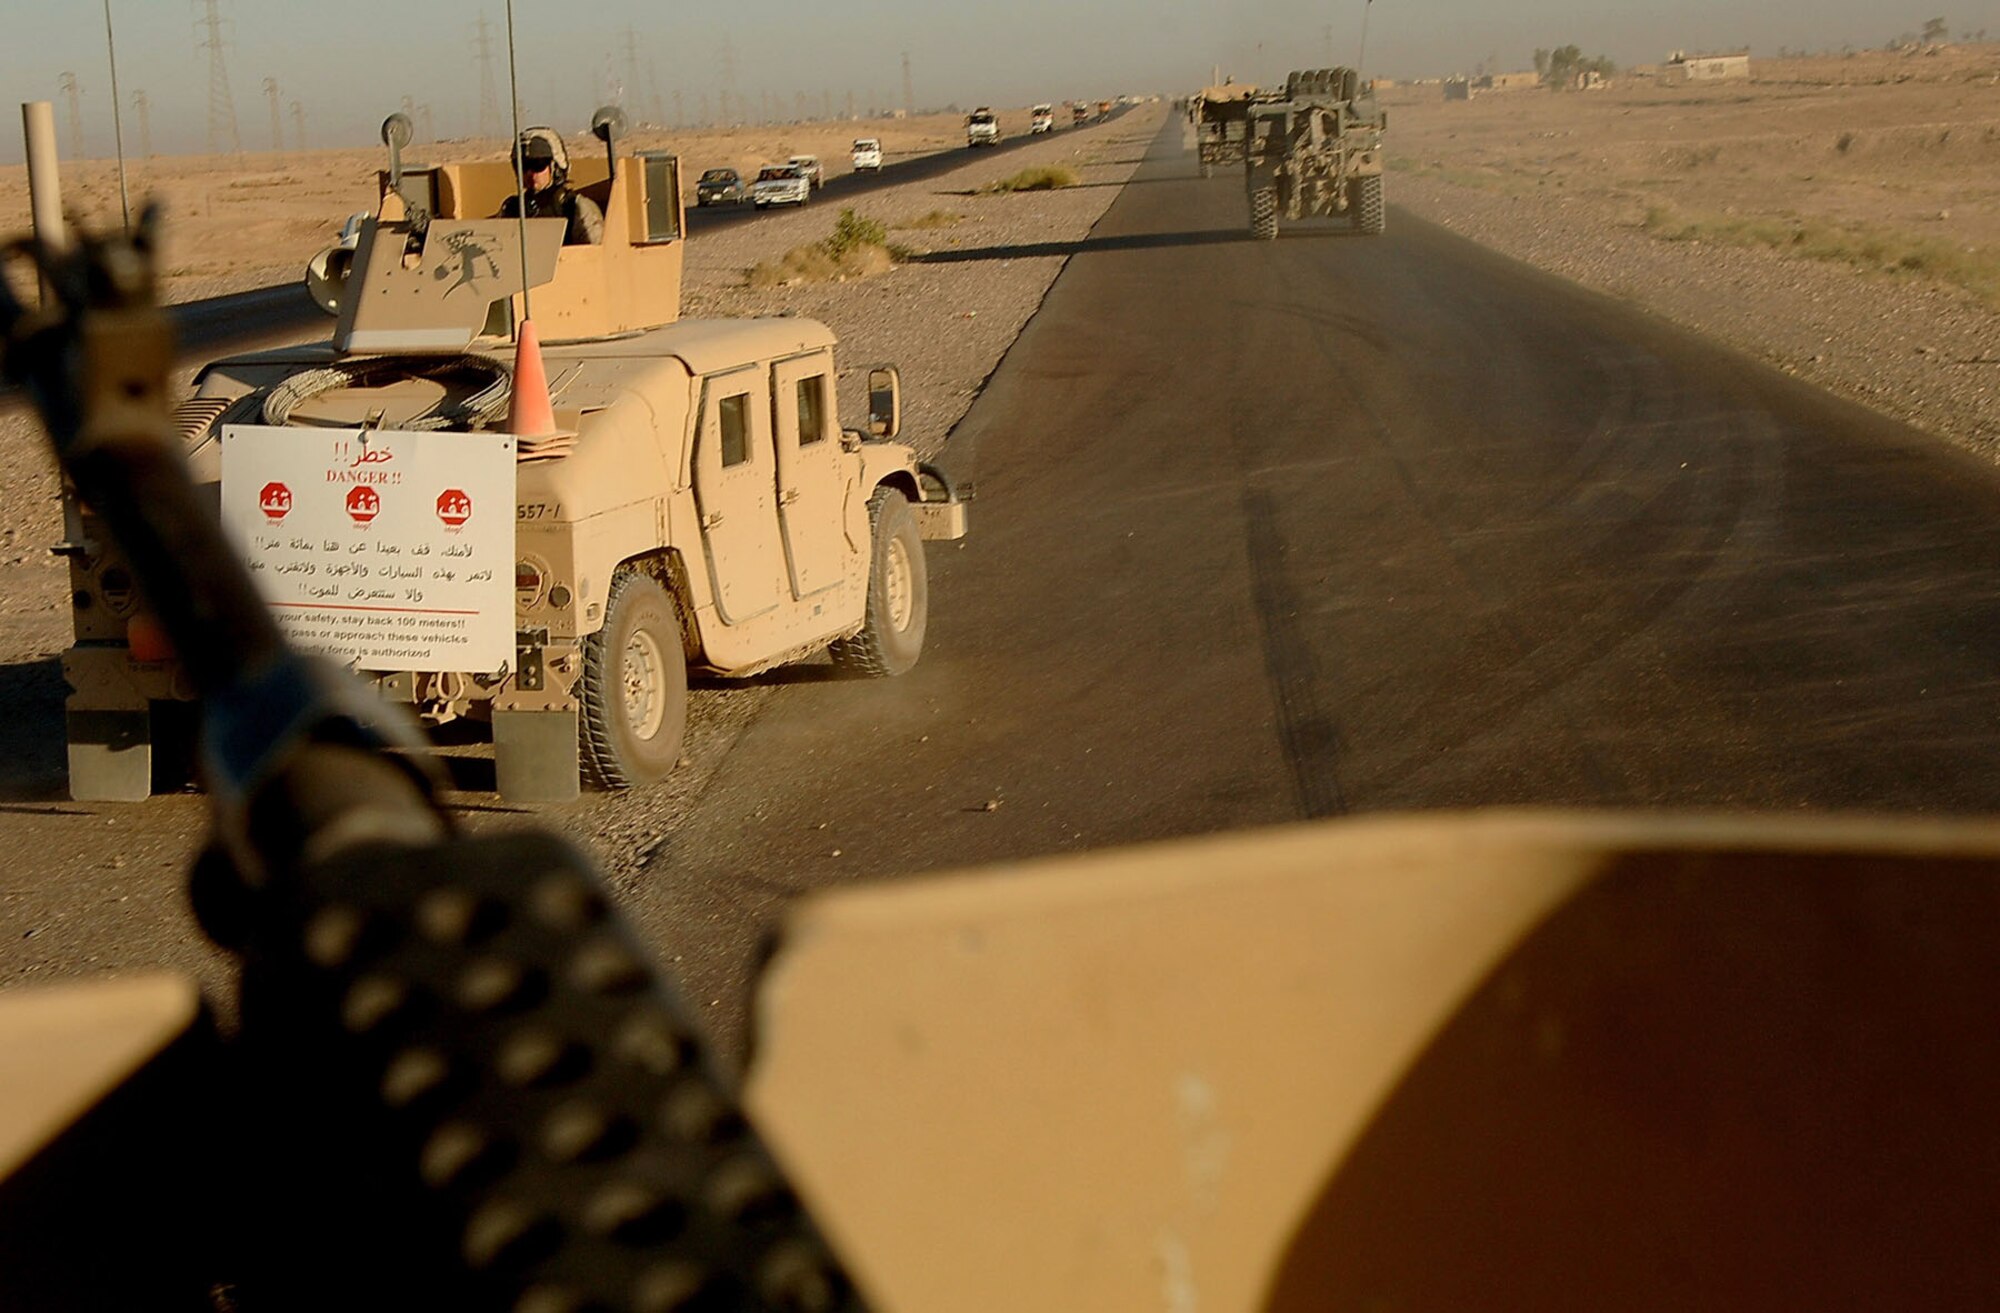 View from an escort vehicle in an Air Force convoy mission to Mosul, Iraq, in September 2006. (U.S. Air Force photo)